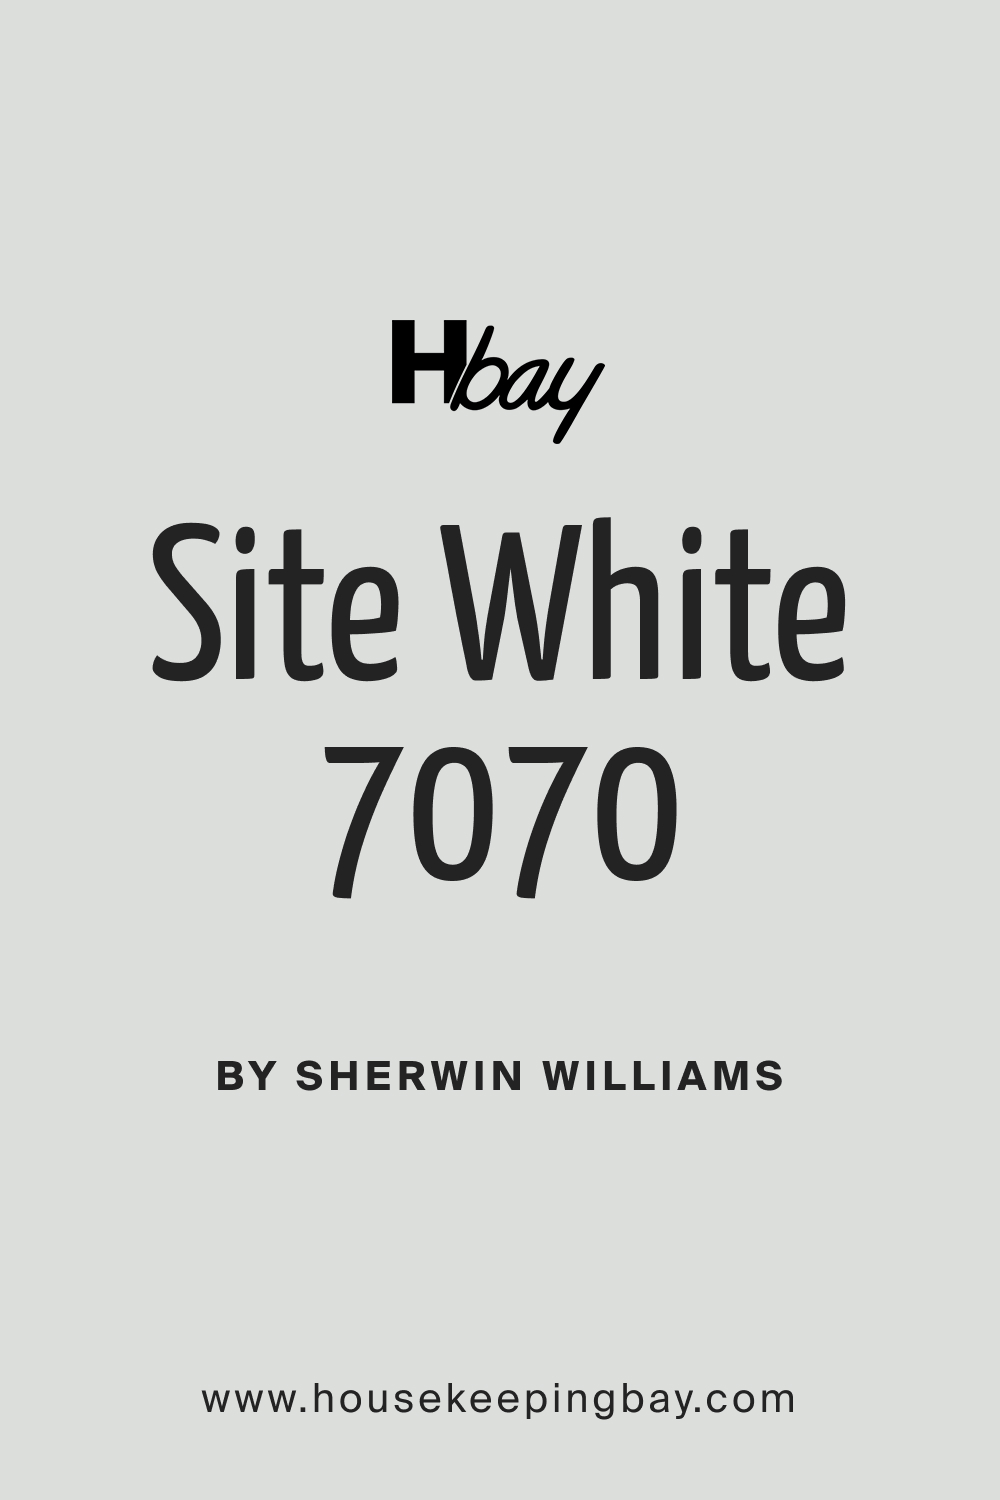 SW 7070 Site White by Sherwin Williams